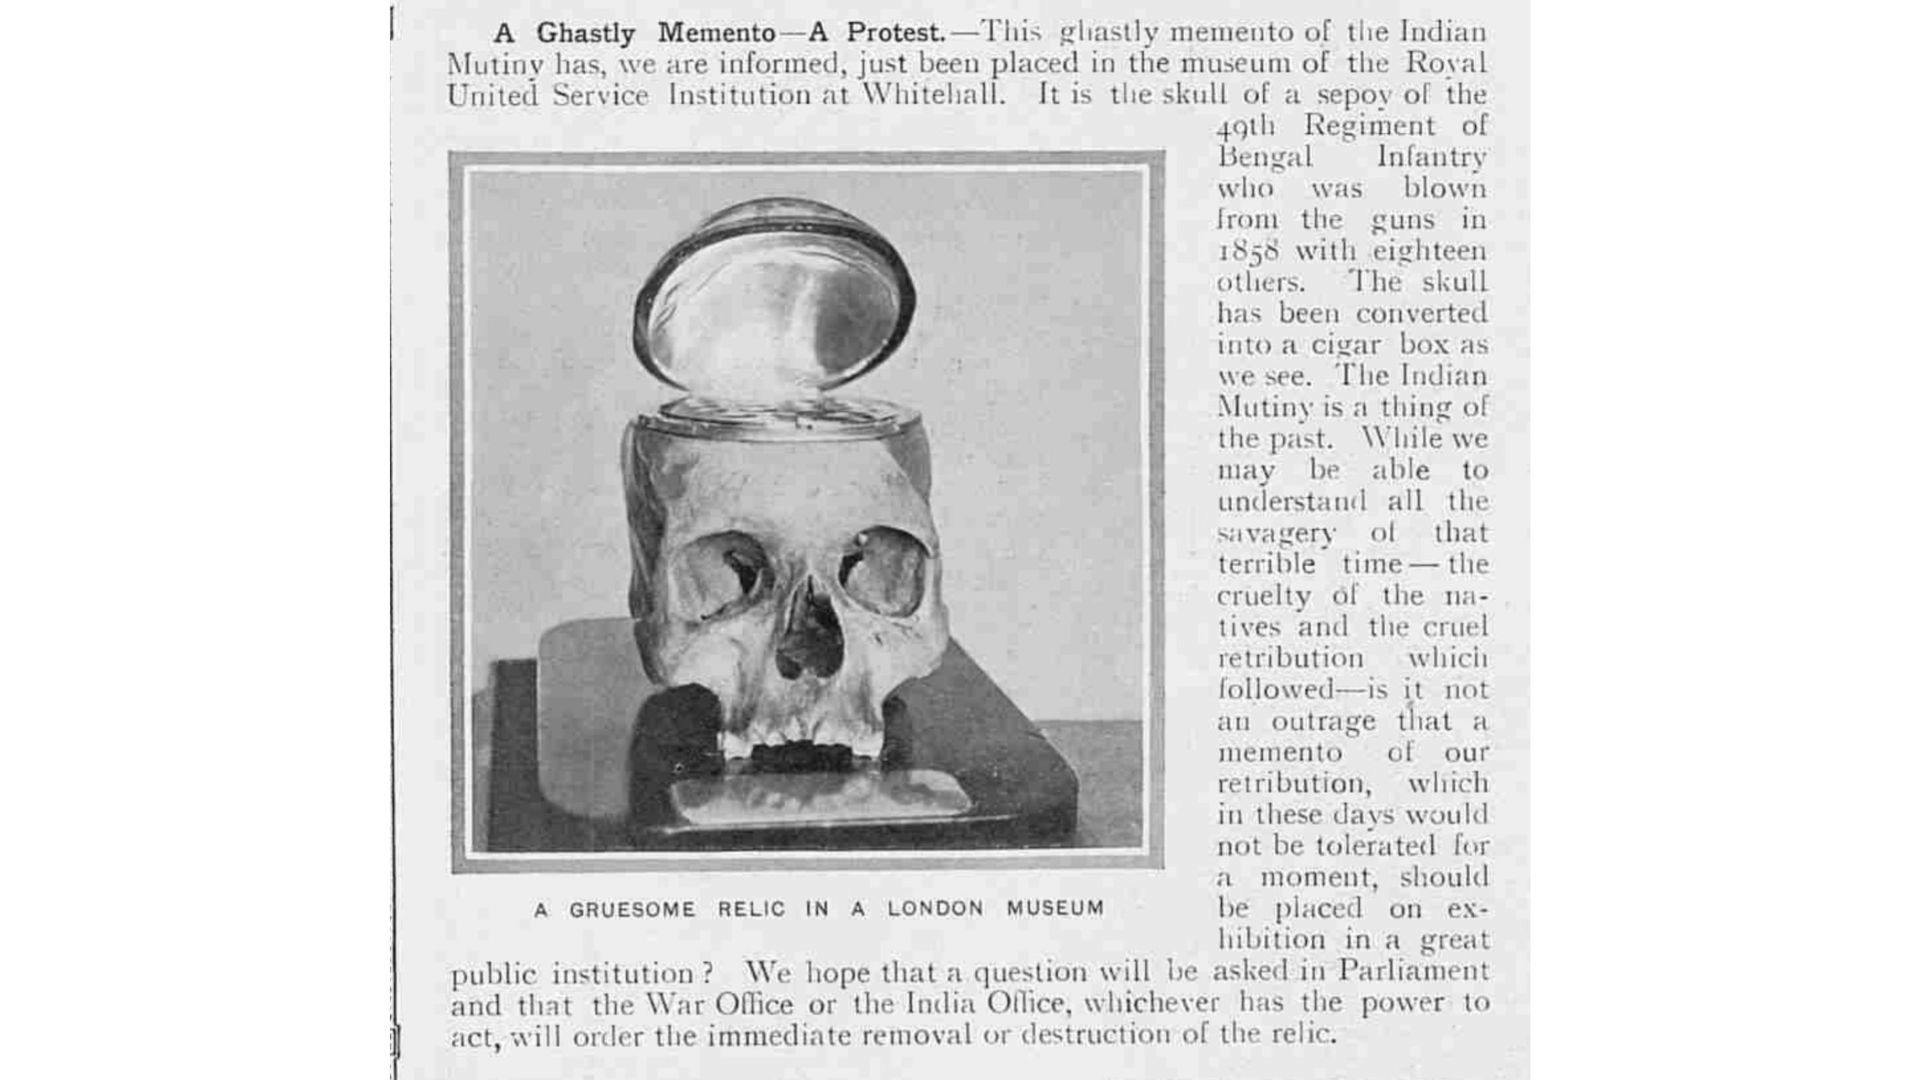 A Sepoy's Skull being used as a cigar case in London from The Sphere Newspaper